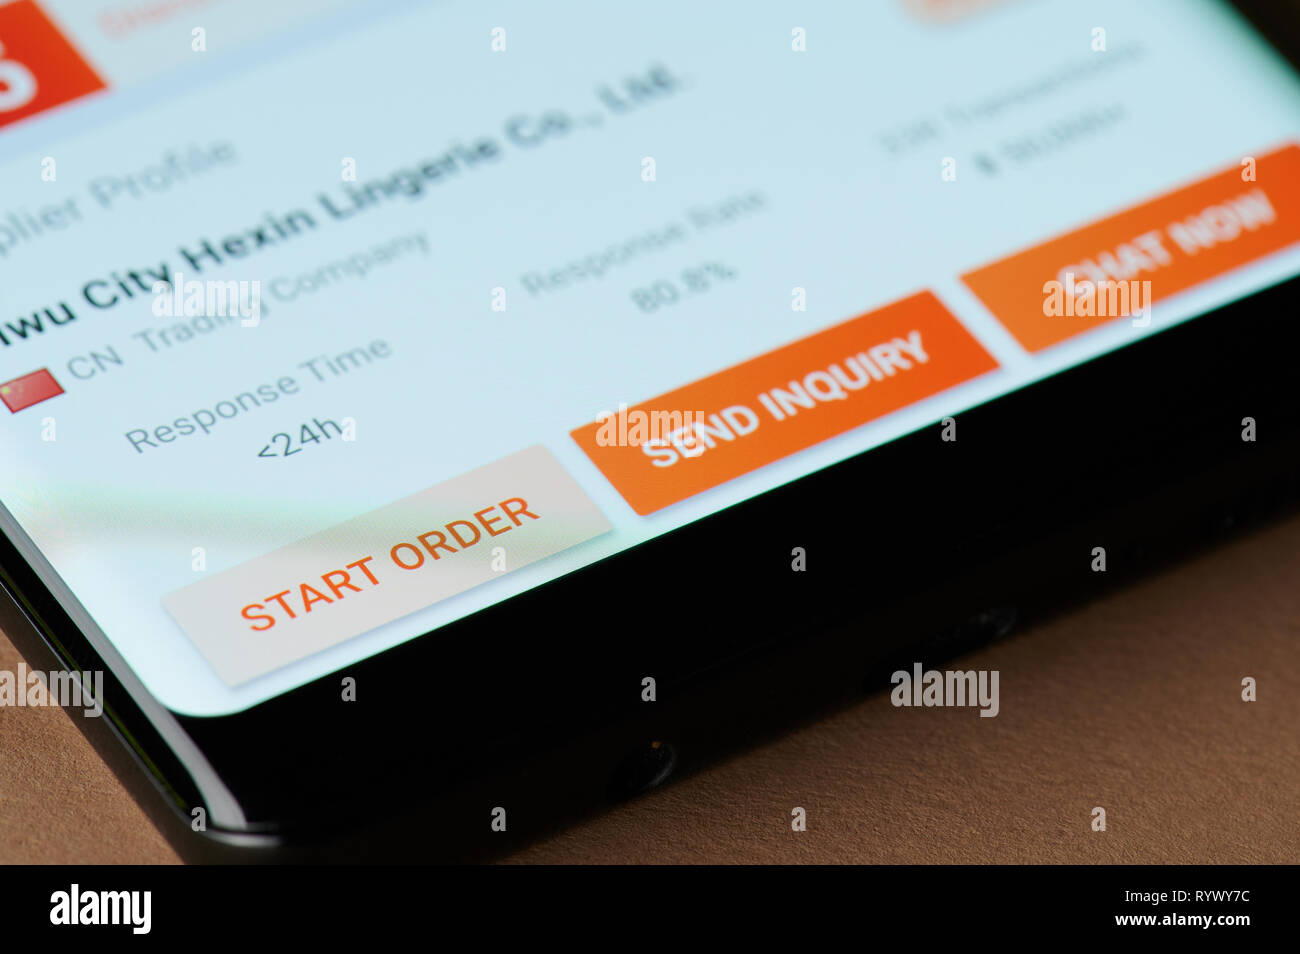 New york, USA - march 15, 2019: Start order in alibaba application on smartphone screen close up view Stock Photo